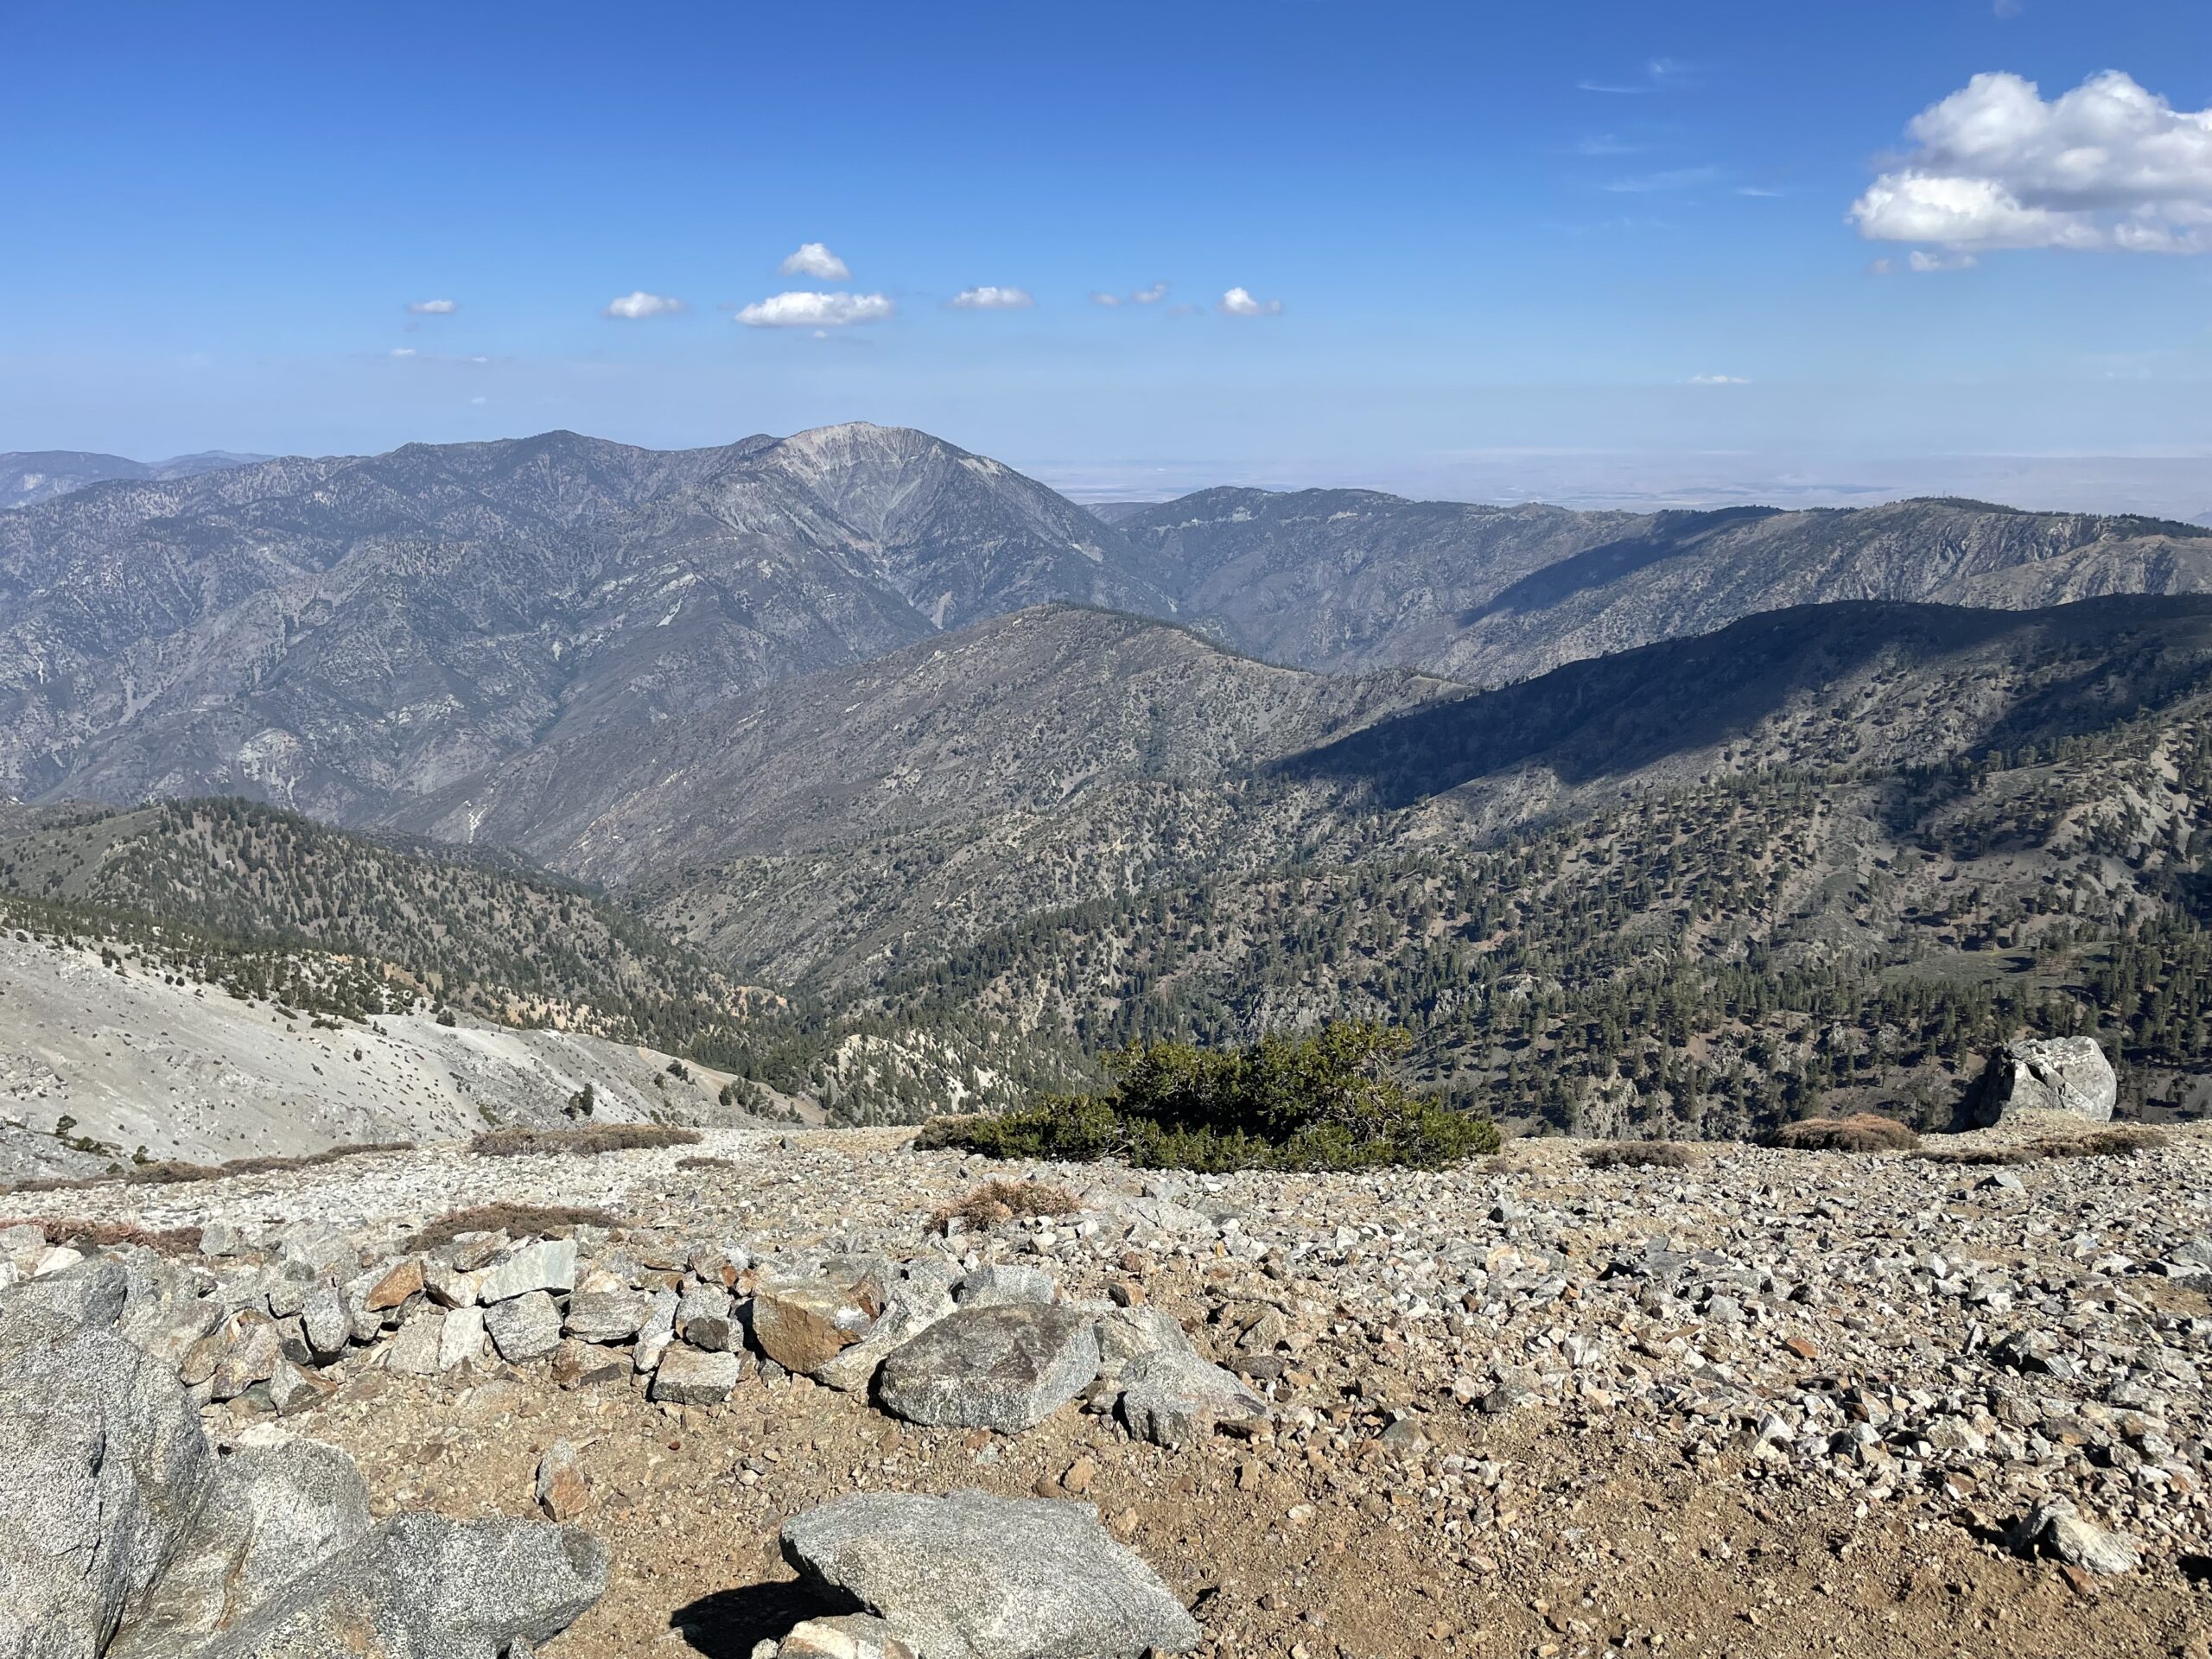 View with trees from Mount Baldy